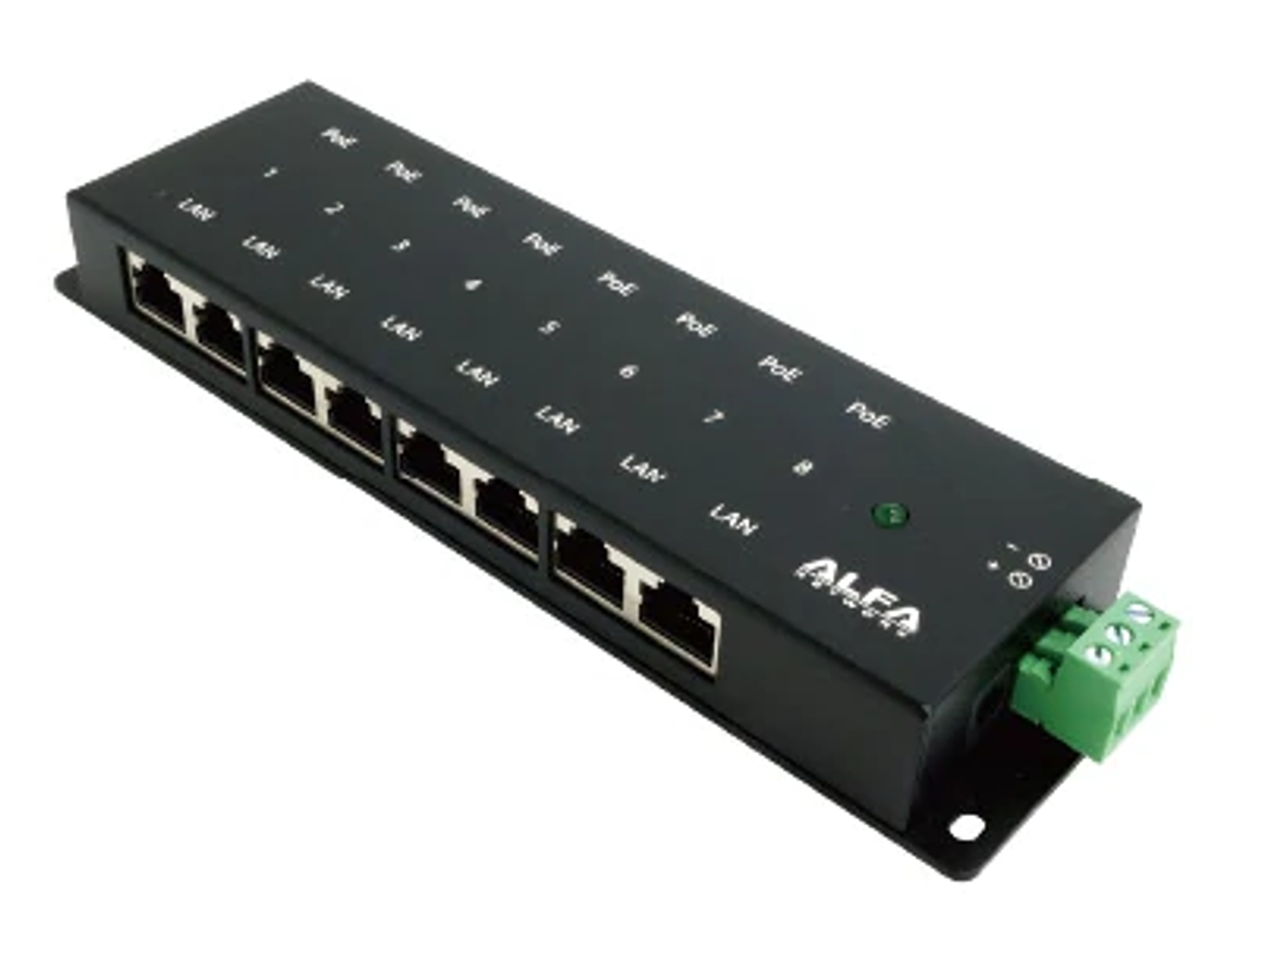 8 Ports 12 - 48V DC Input Passive POE Injector with Power Redundancy